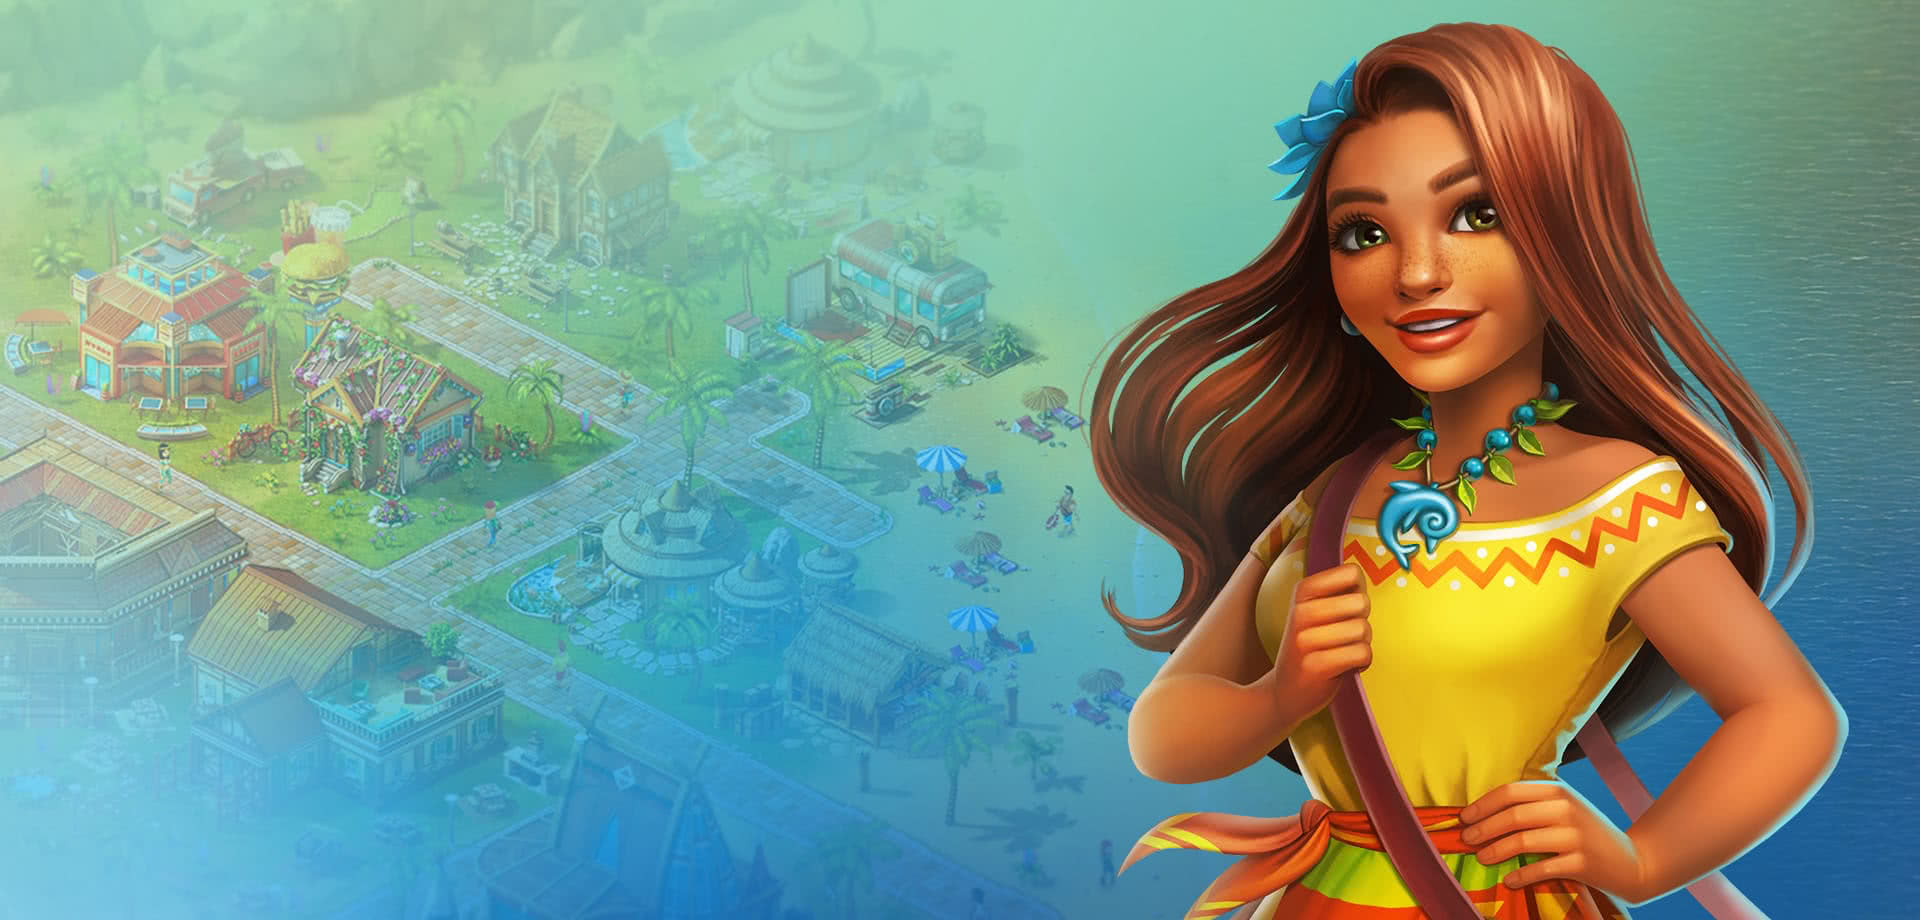 Paradise Island 2 - Aloha! ➡ goo.gl/4WNfQA 🎁 Expand your knowledge of the  game by 360 degrees! 🙃 Kick back on a tropical island all year round and  build an extremely popular